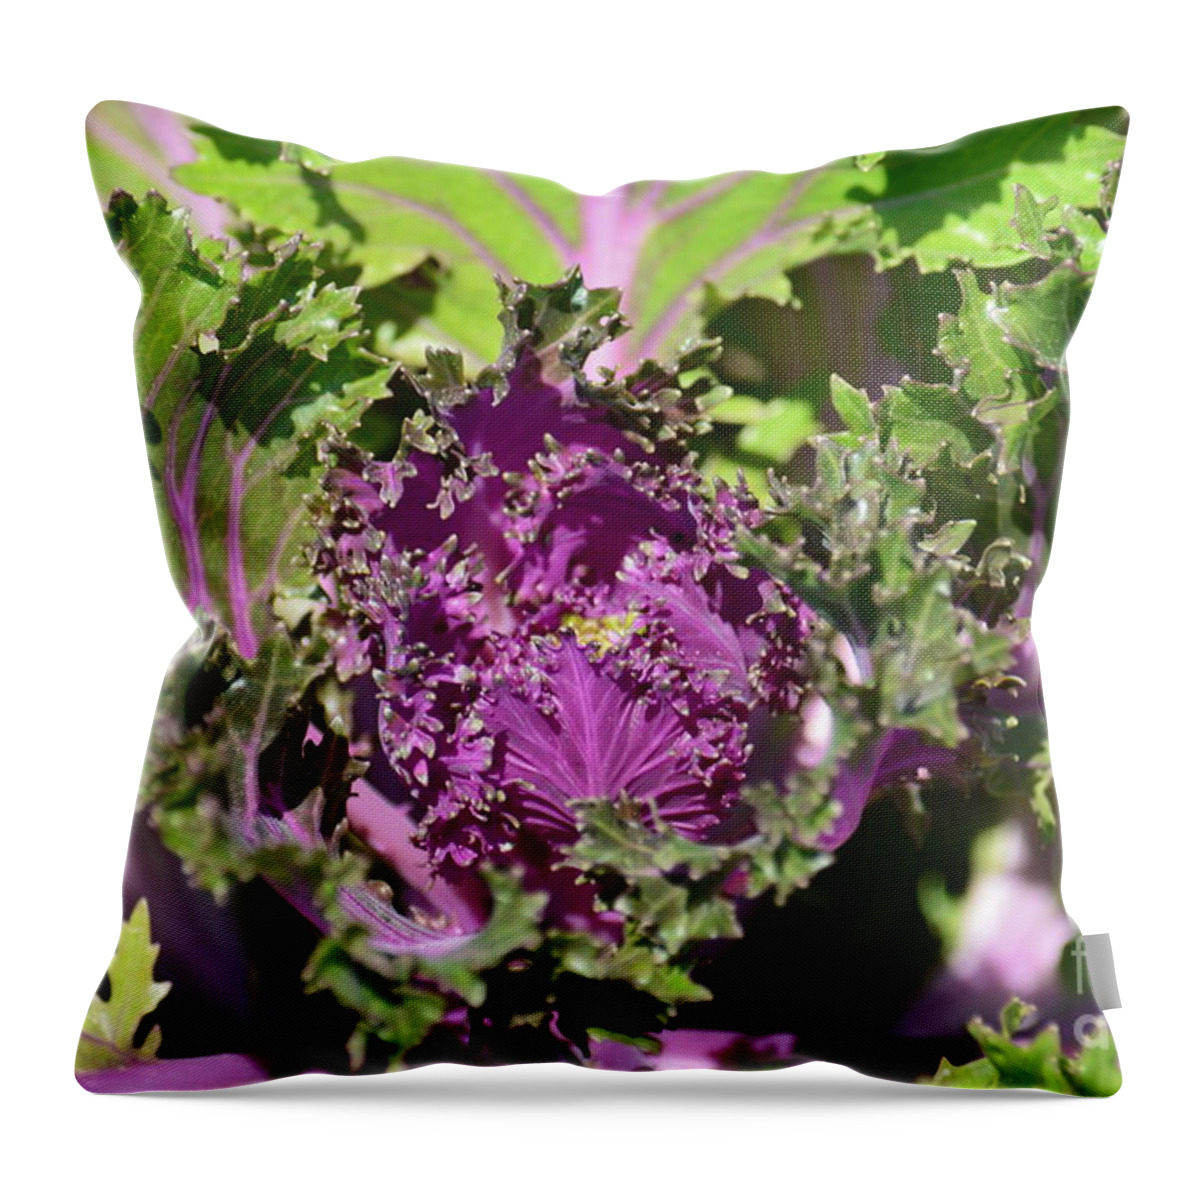 Purple Kale Throw Pillow featuring the photograph Purple Kale by Maria Urso